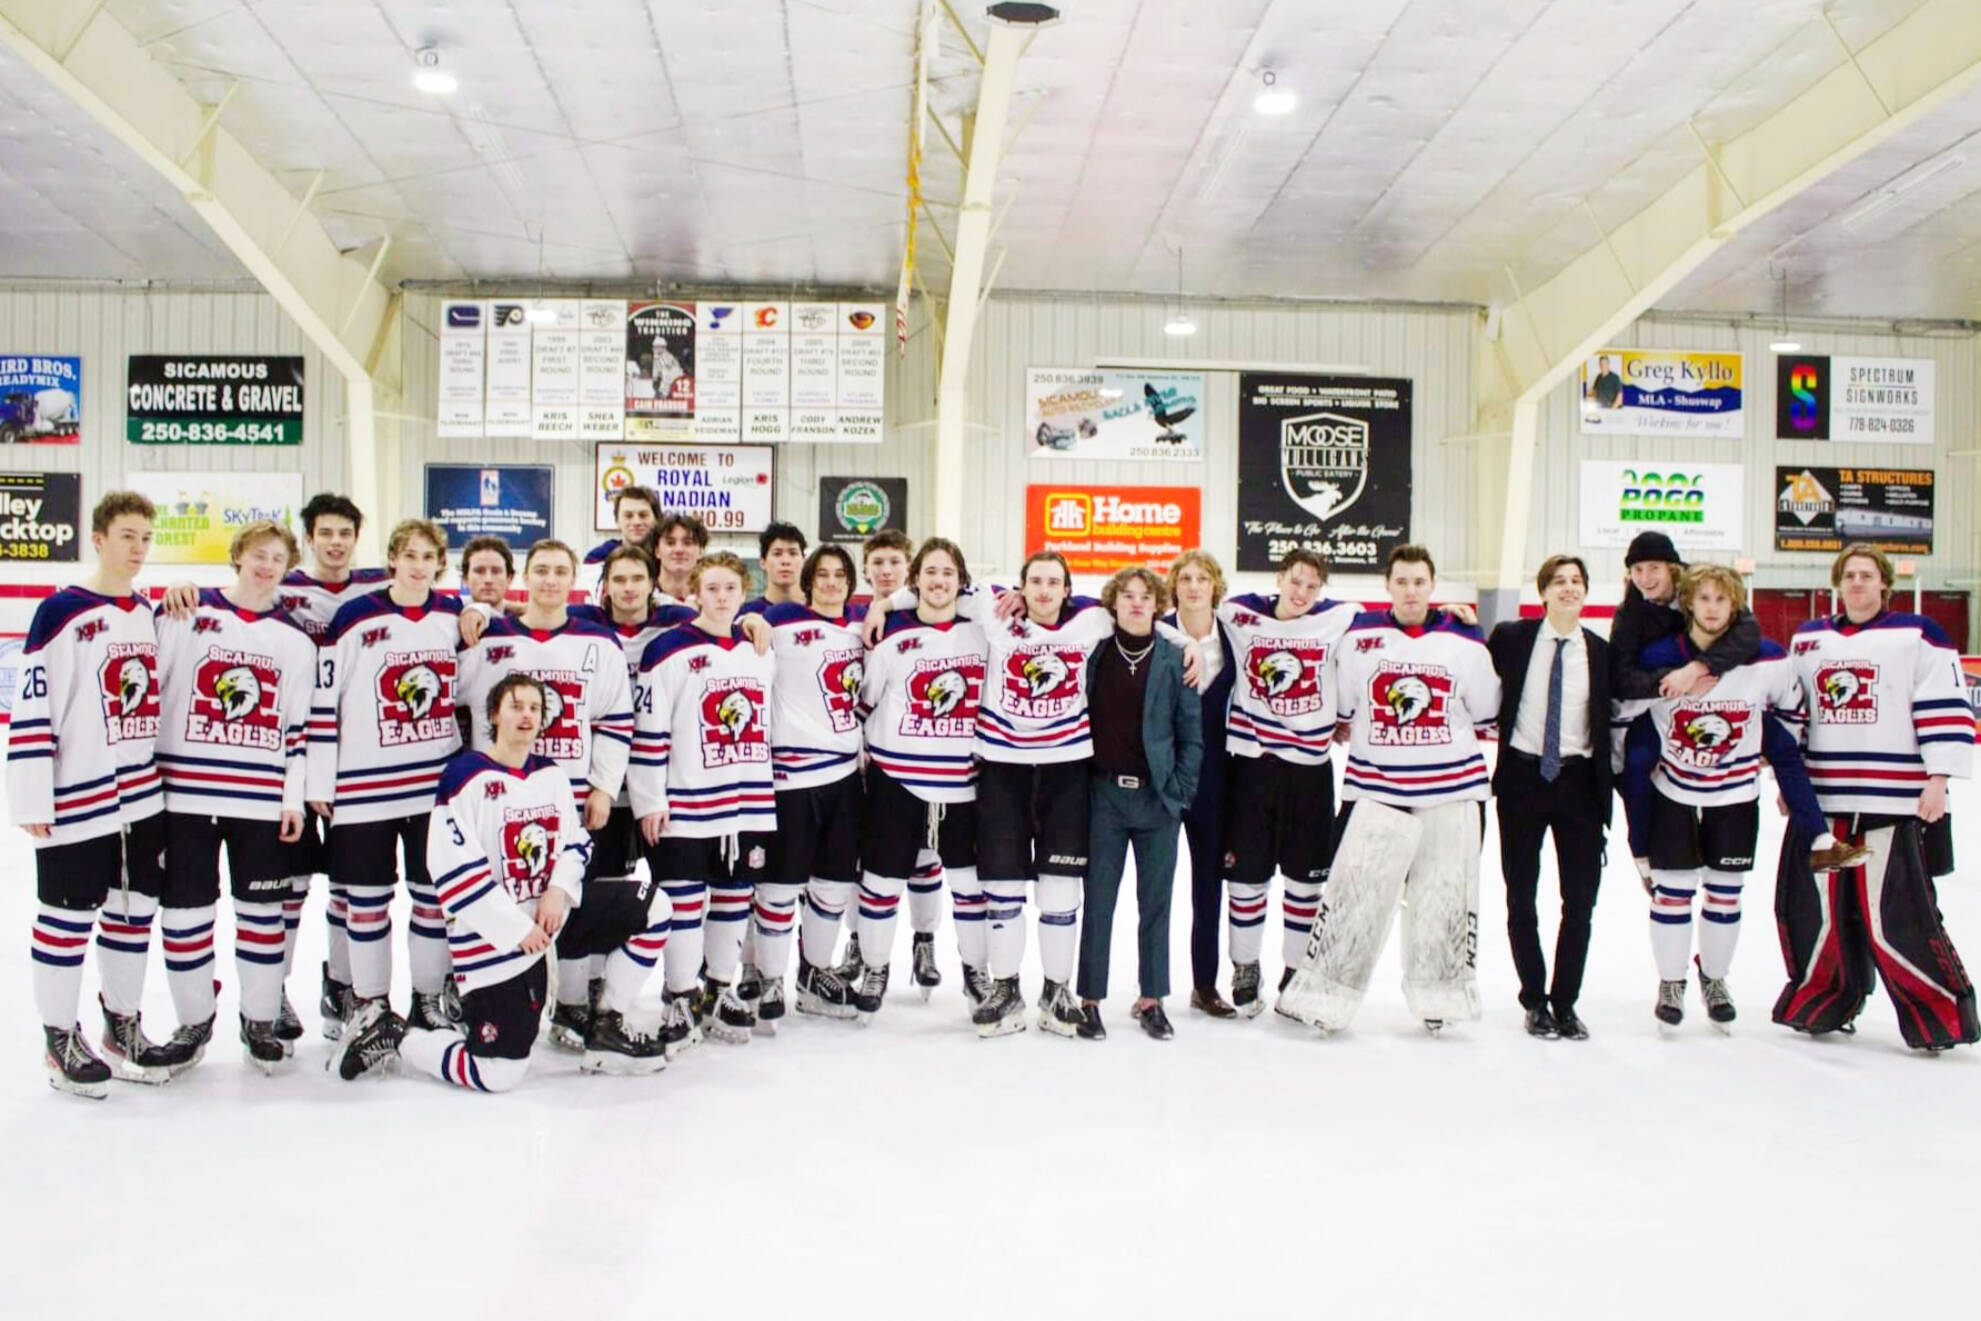 The Sicamous Eagles were recognized by the KIJHL, with a Top Defenceman honour for Nicholas Hughes and head coach Nick Deschenes receiving the Coach of the Year award. (Sicamous Eagles- Facebook)